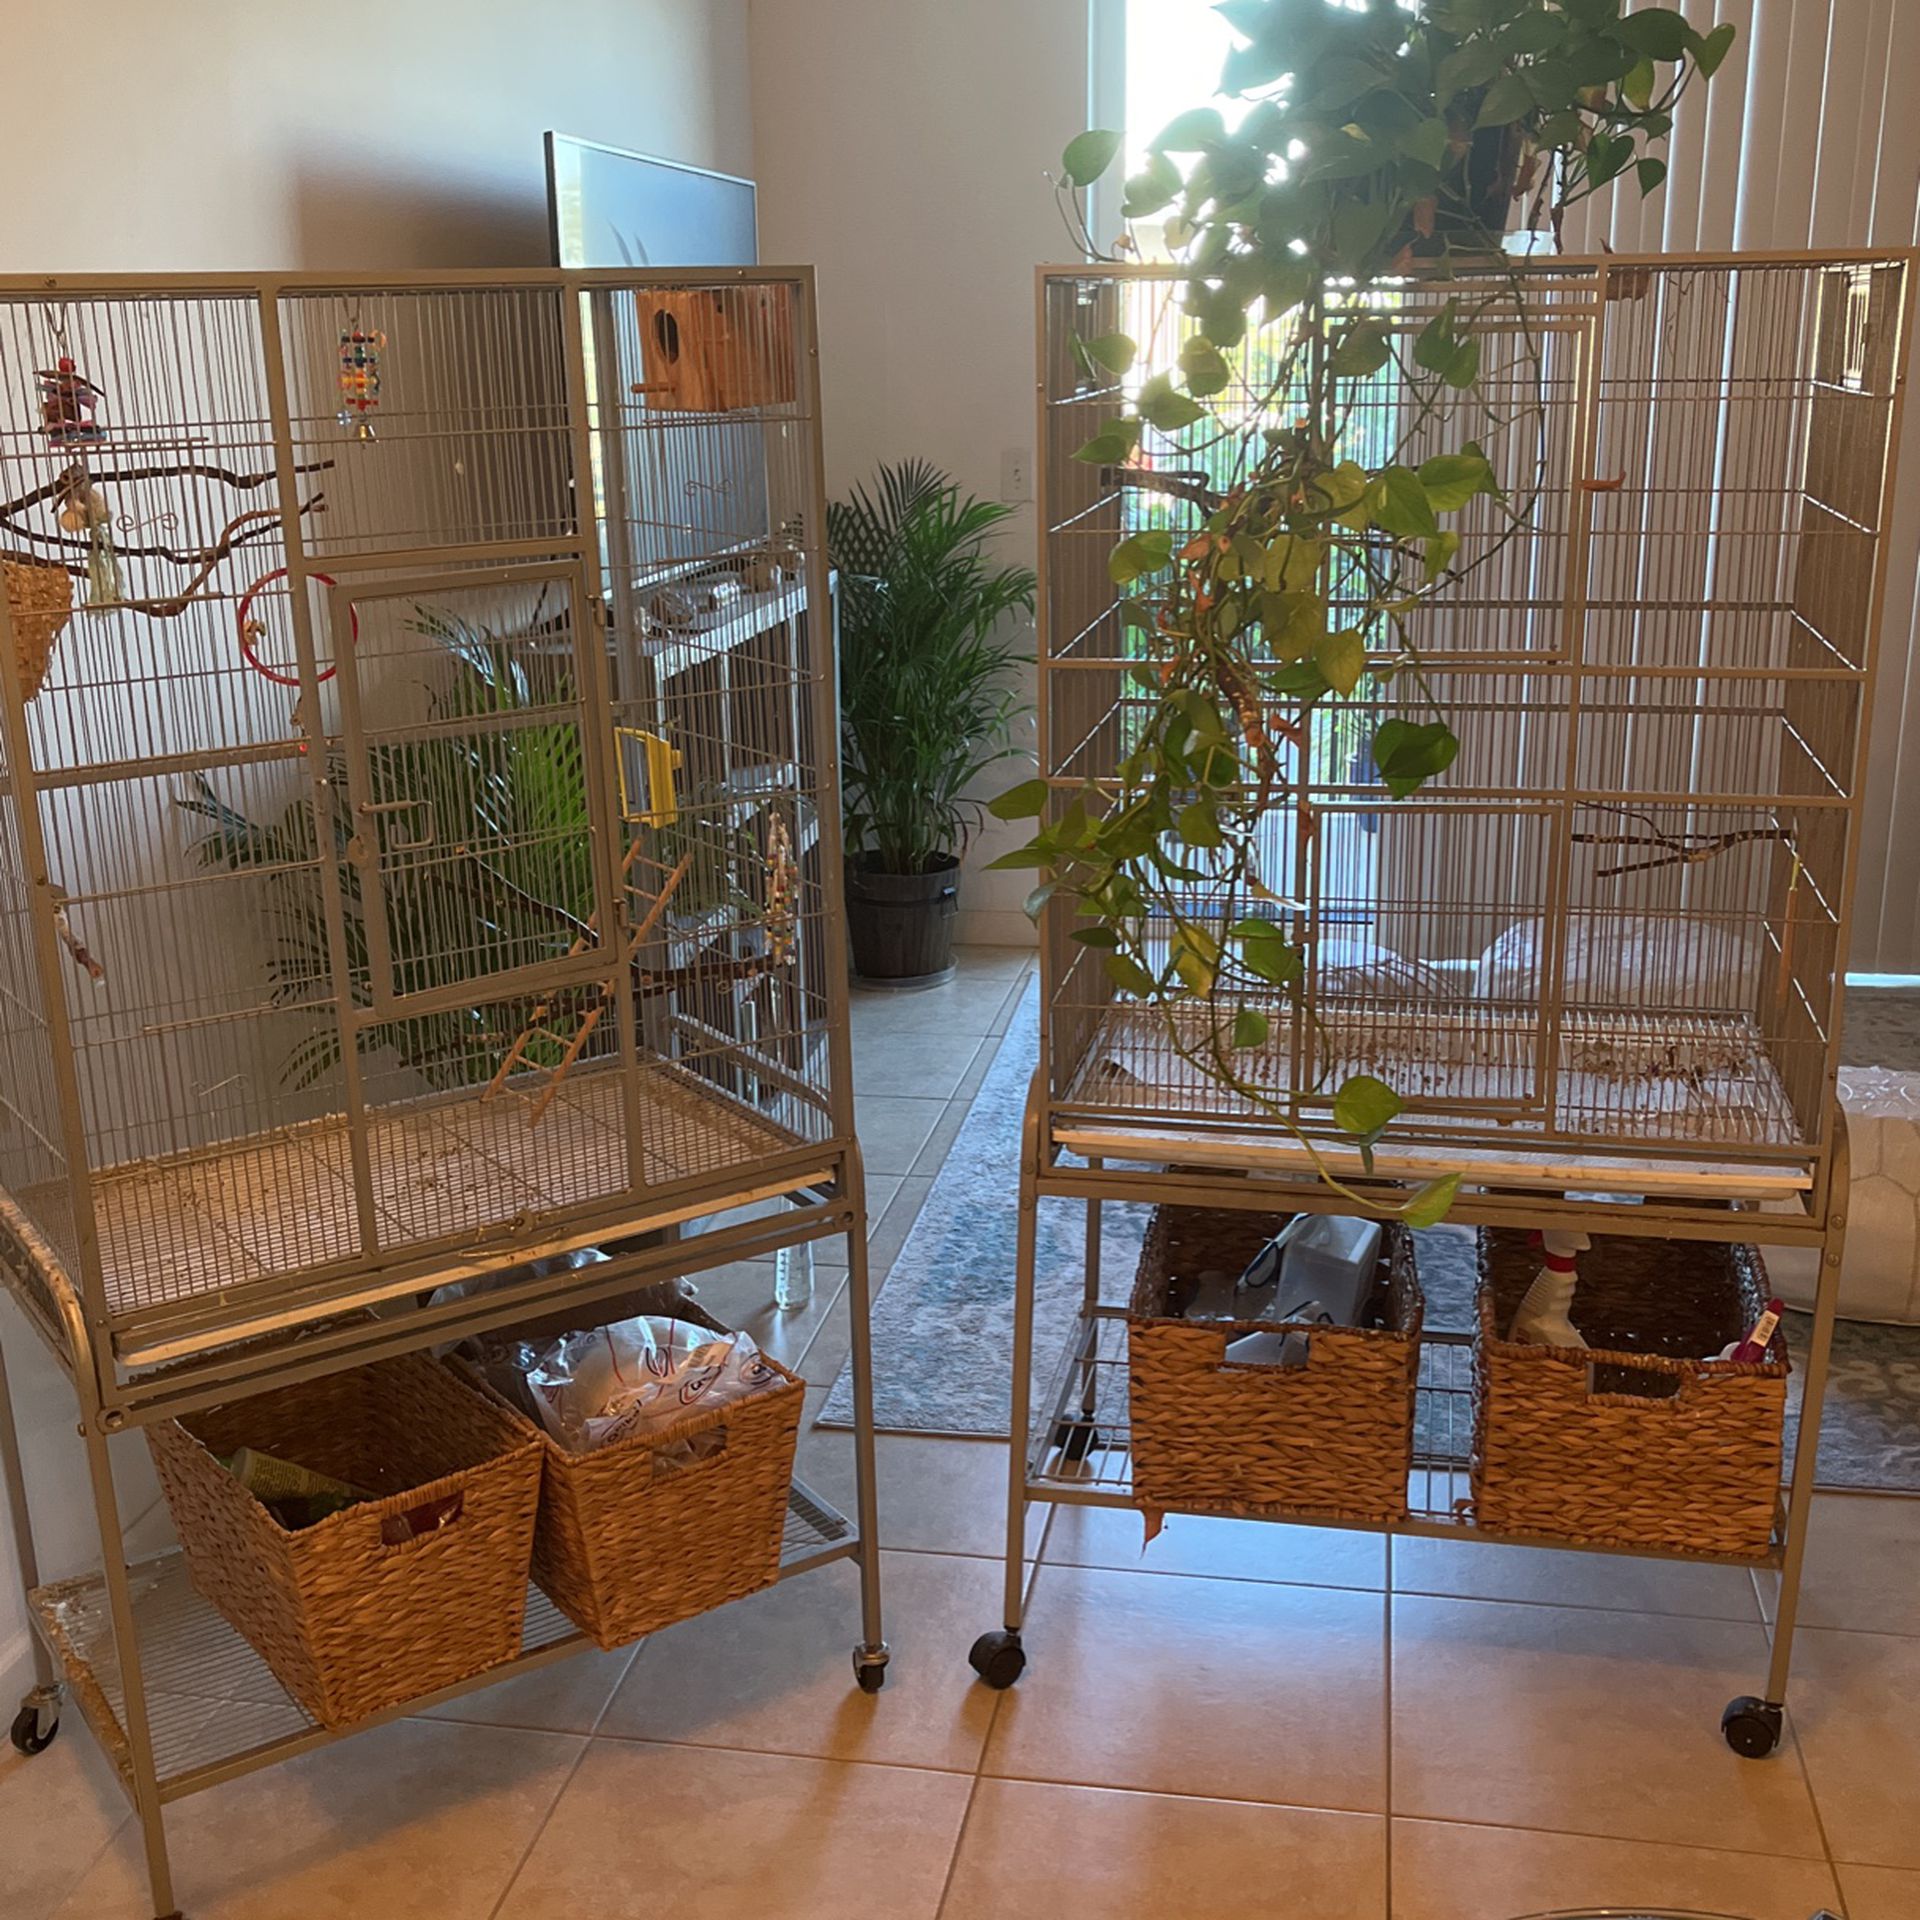 2 Large Bird Cages 